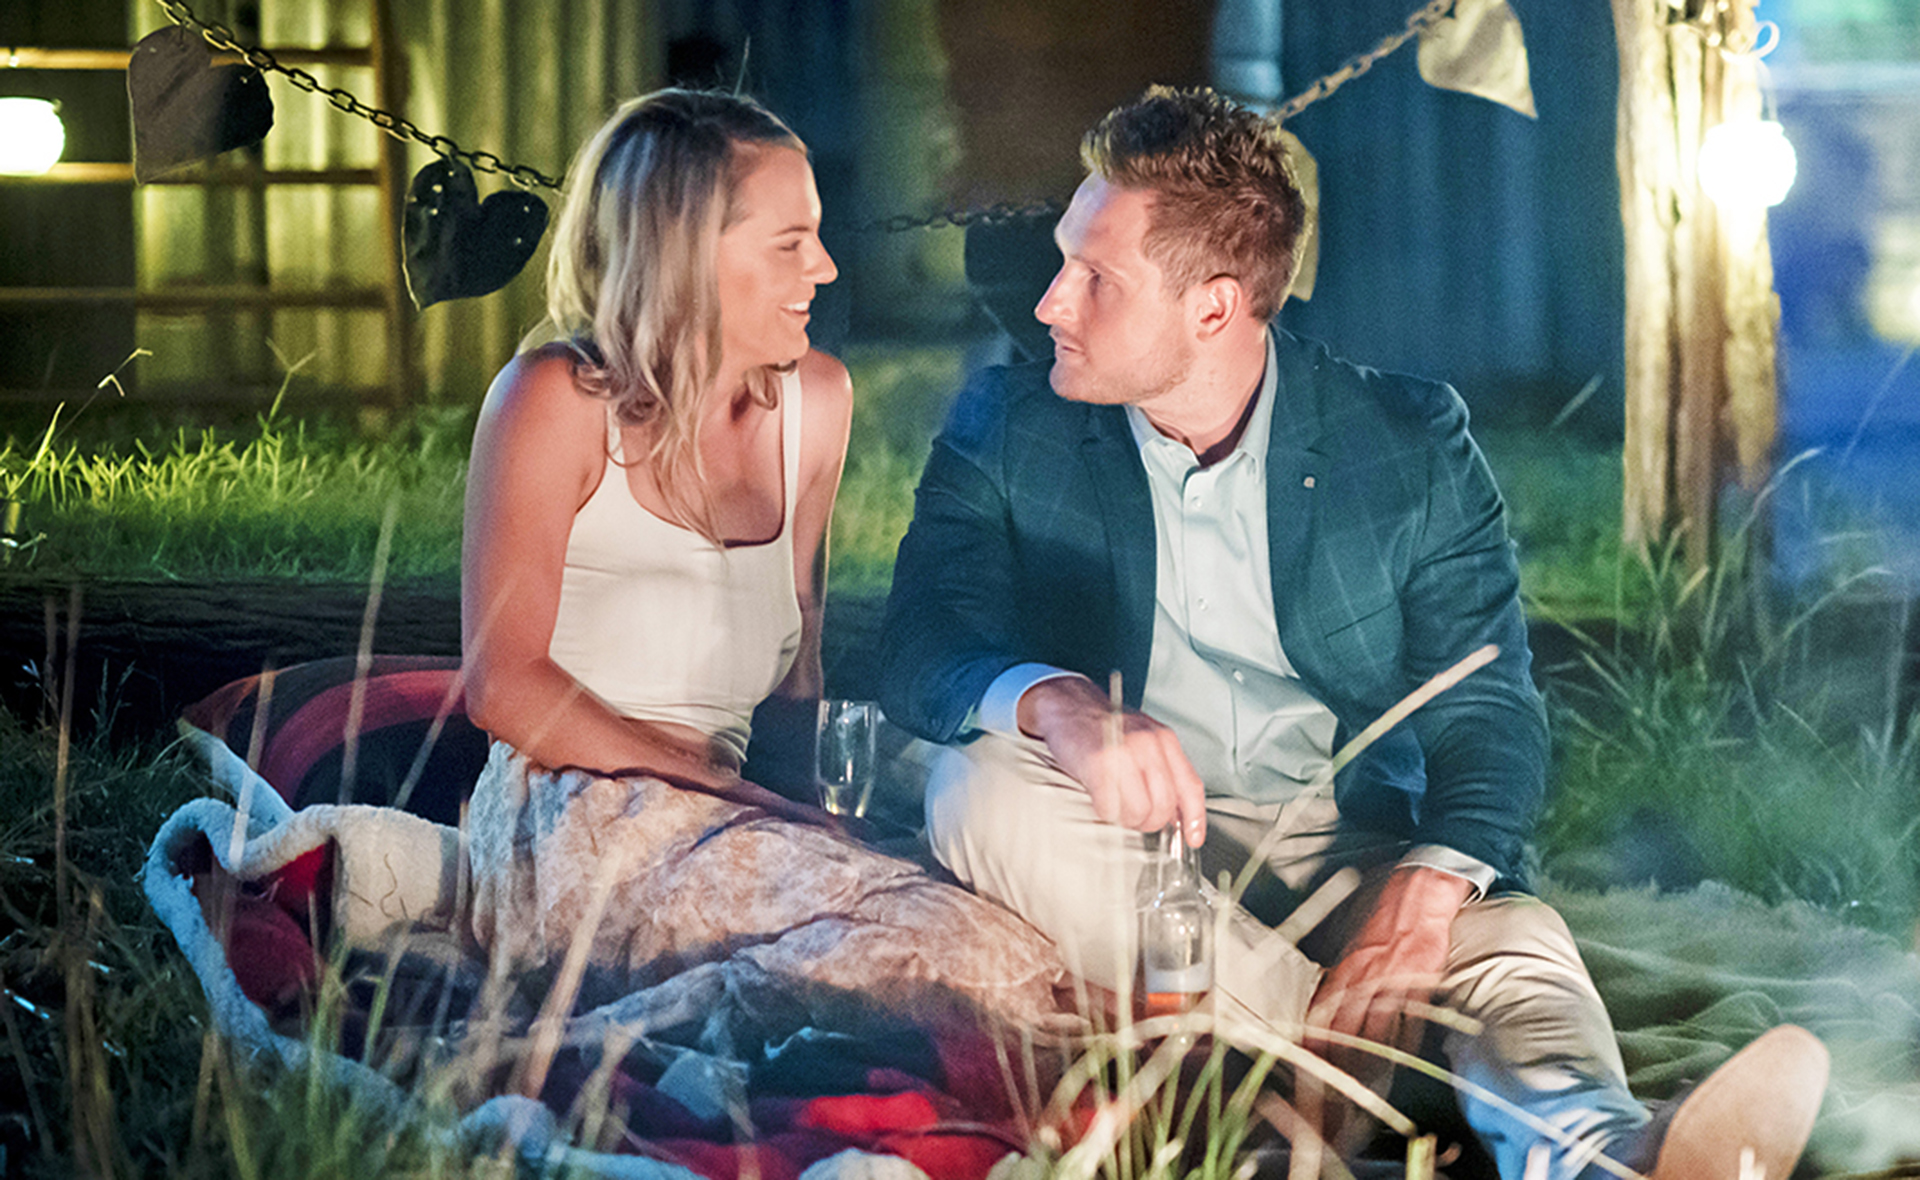 EXCLUSIVE: A new Farmer Wants A Wife contestant threatens Ben and Leish’s connection